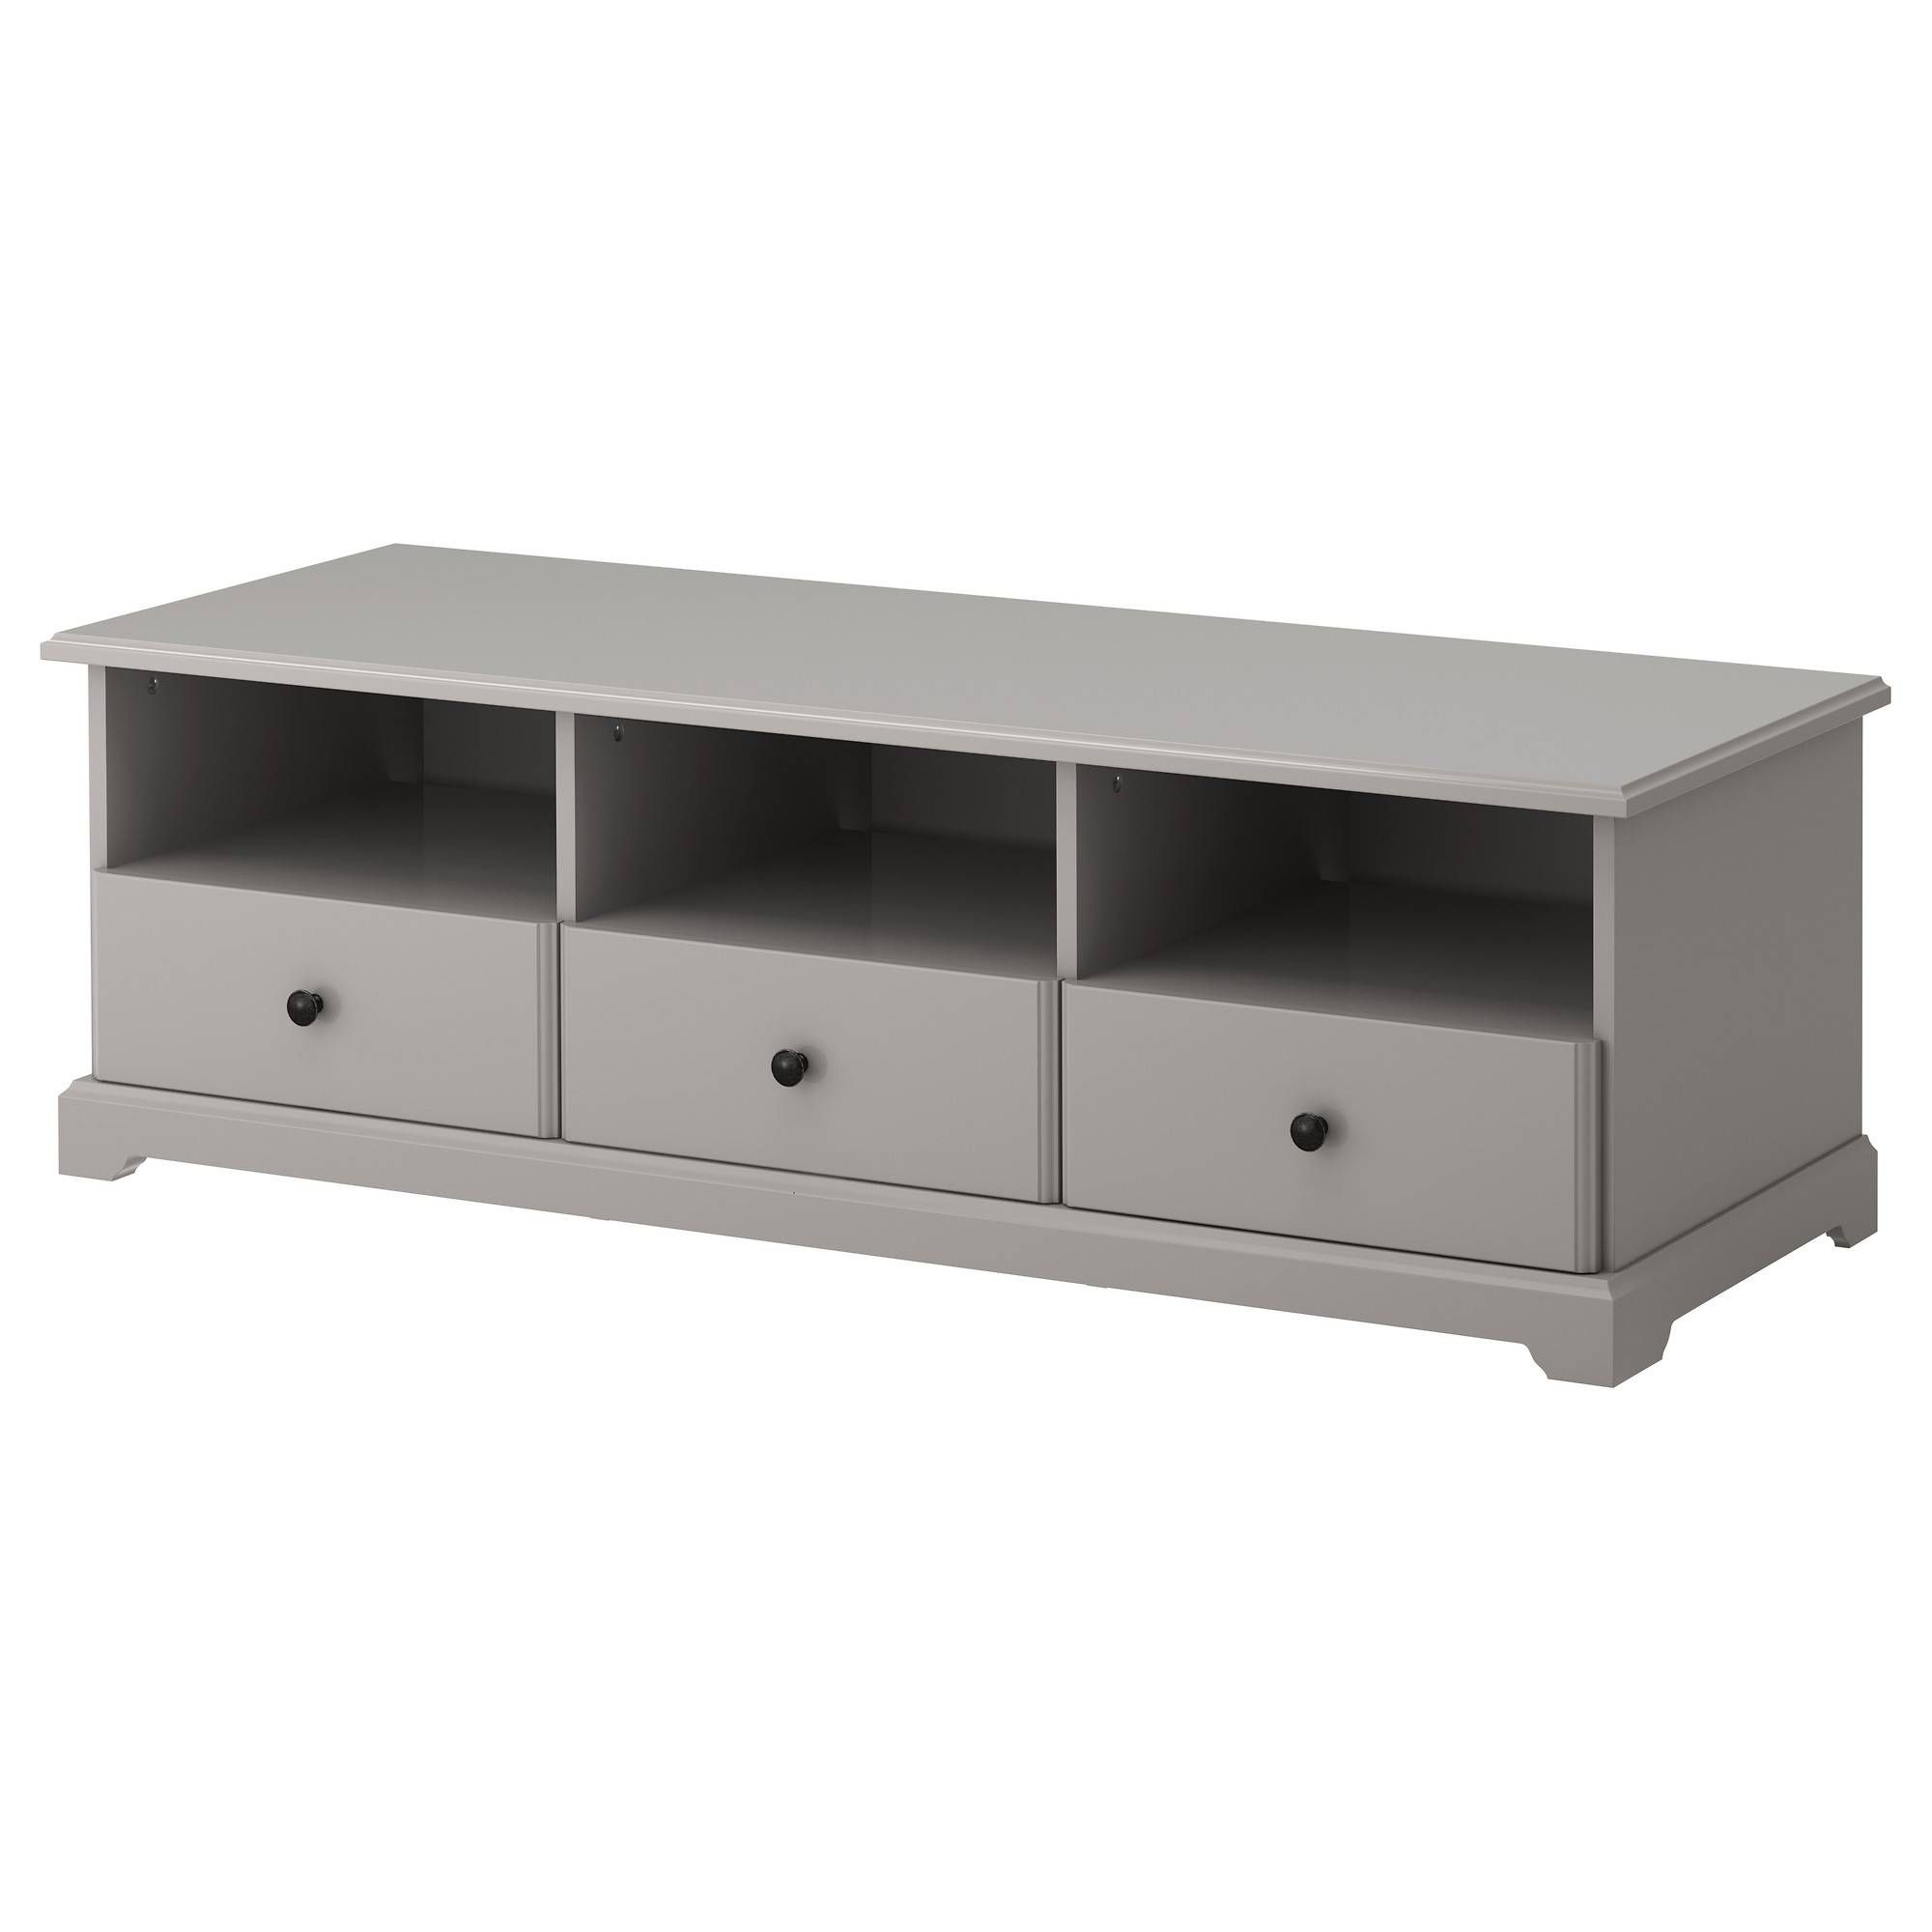 Tv Stands & Entertainment Centers – Ikea Within Low Corner Tv Stands (View 14 of 15)